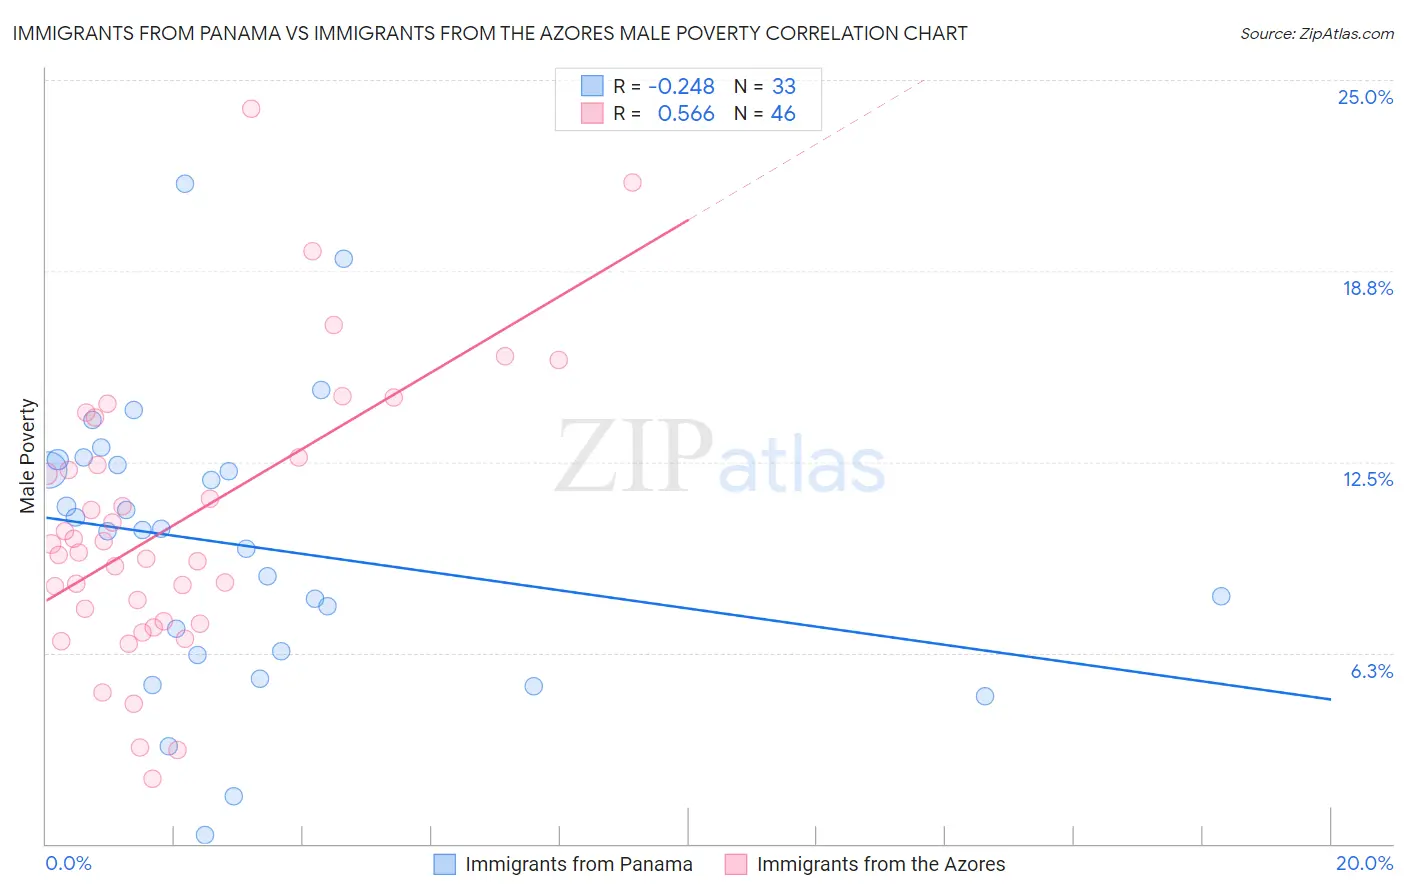 Immigrants from Panama vs Immigrants from the Azores Male Poverty